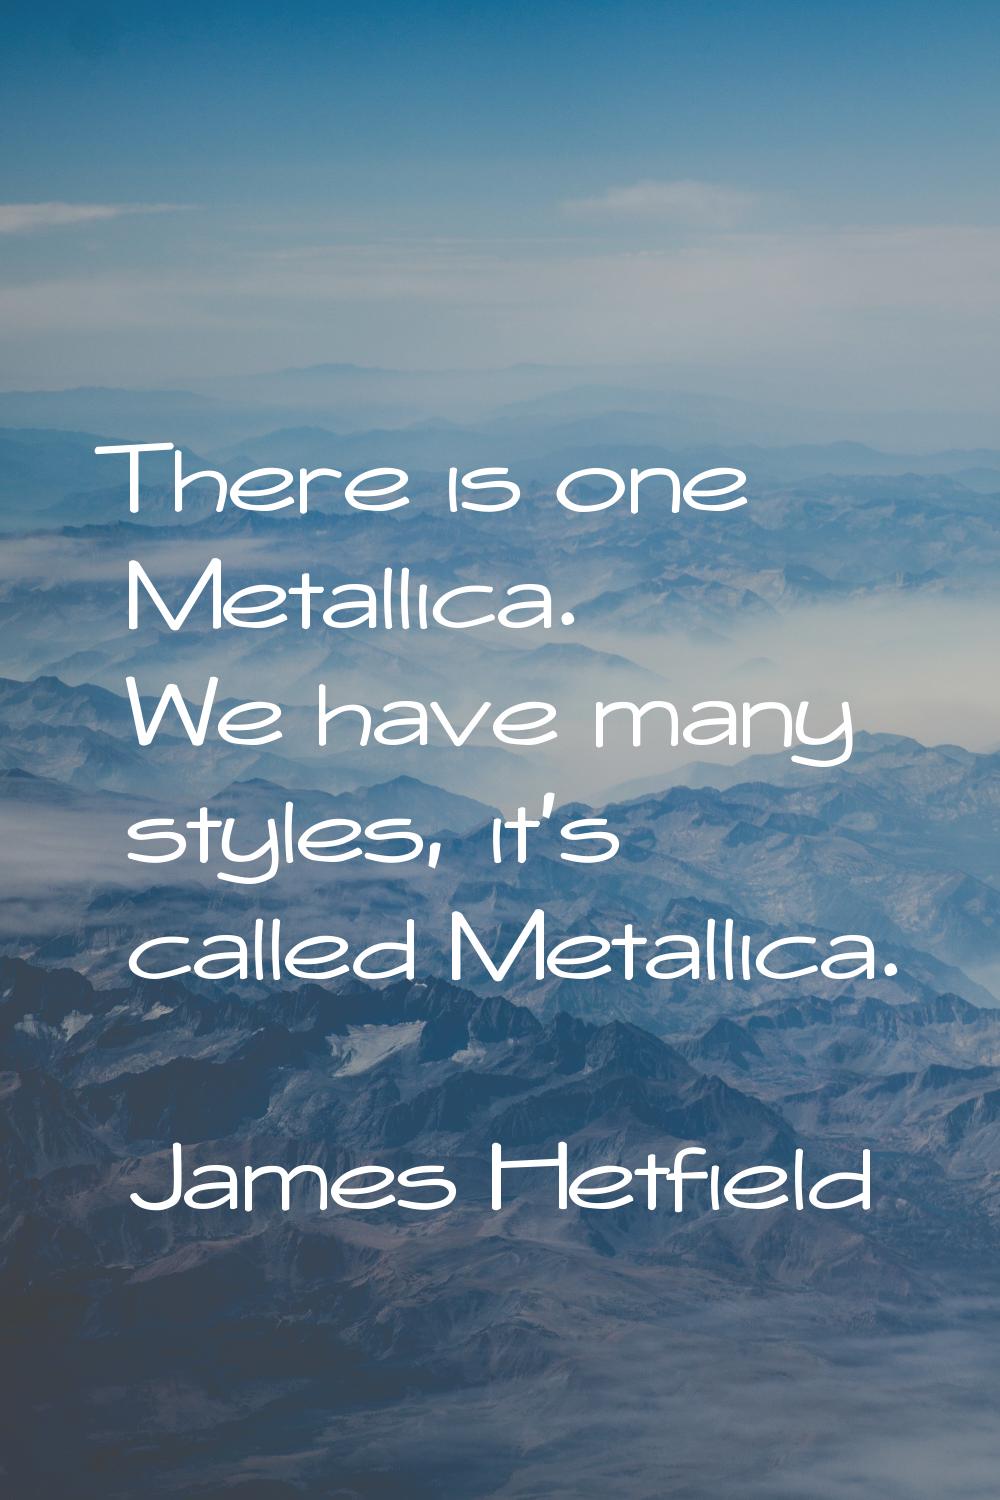 There is one Metallica. We have many styles, it's called Metallica.